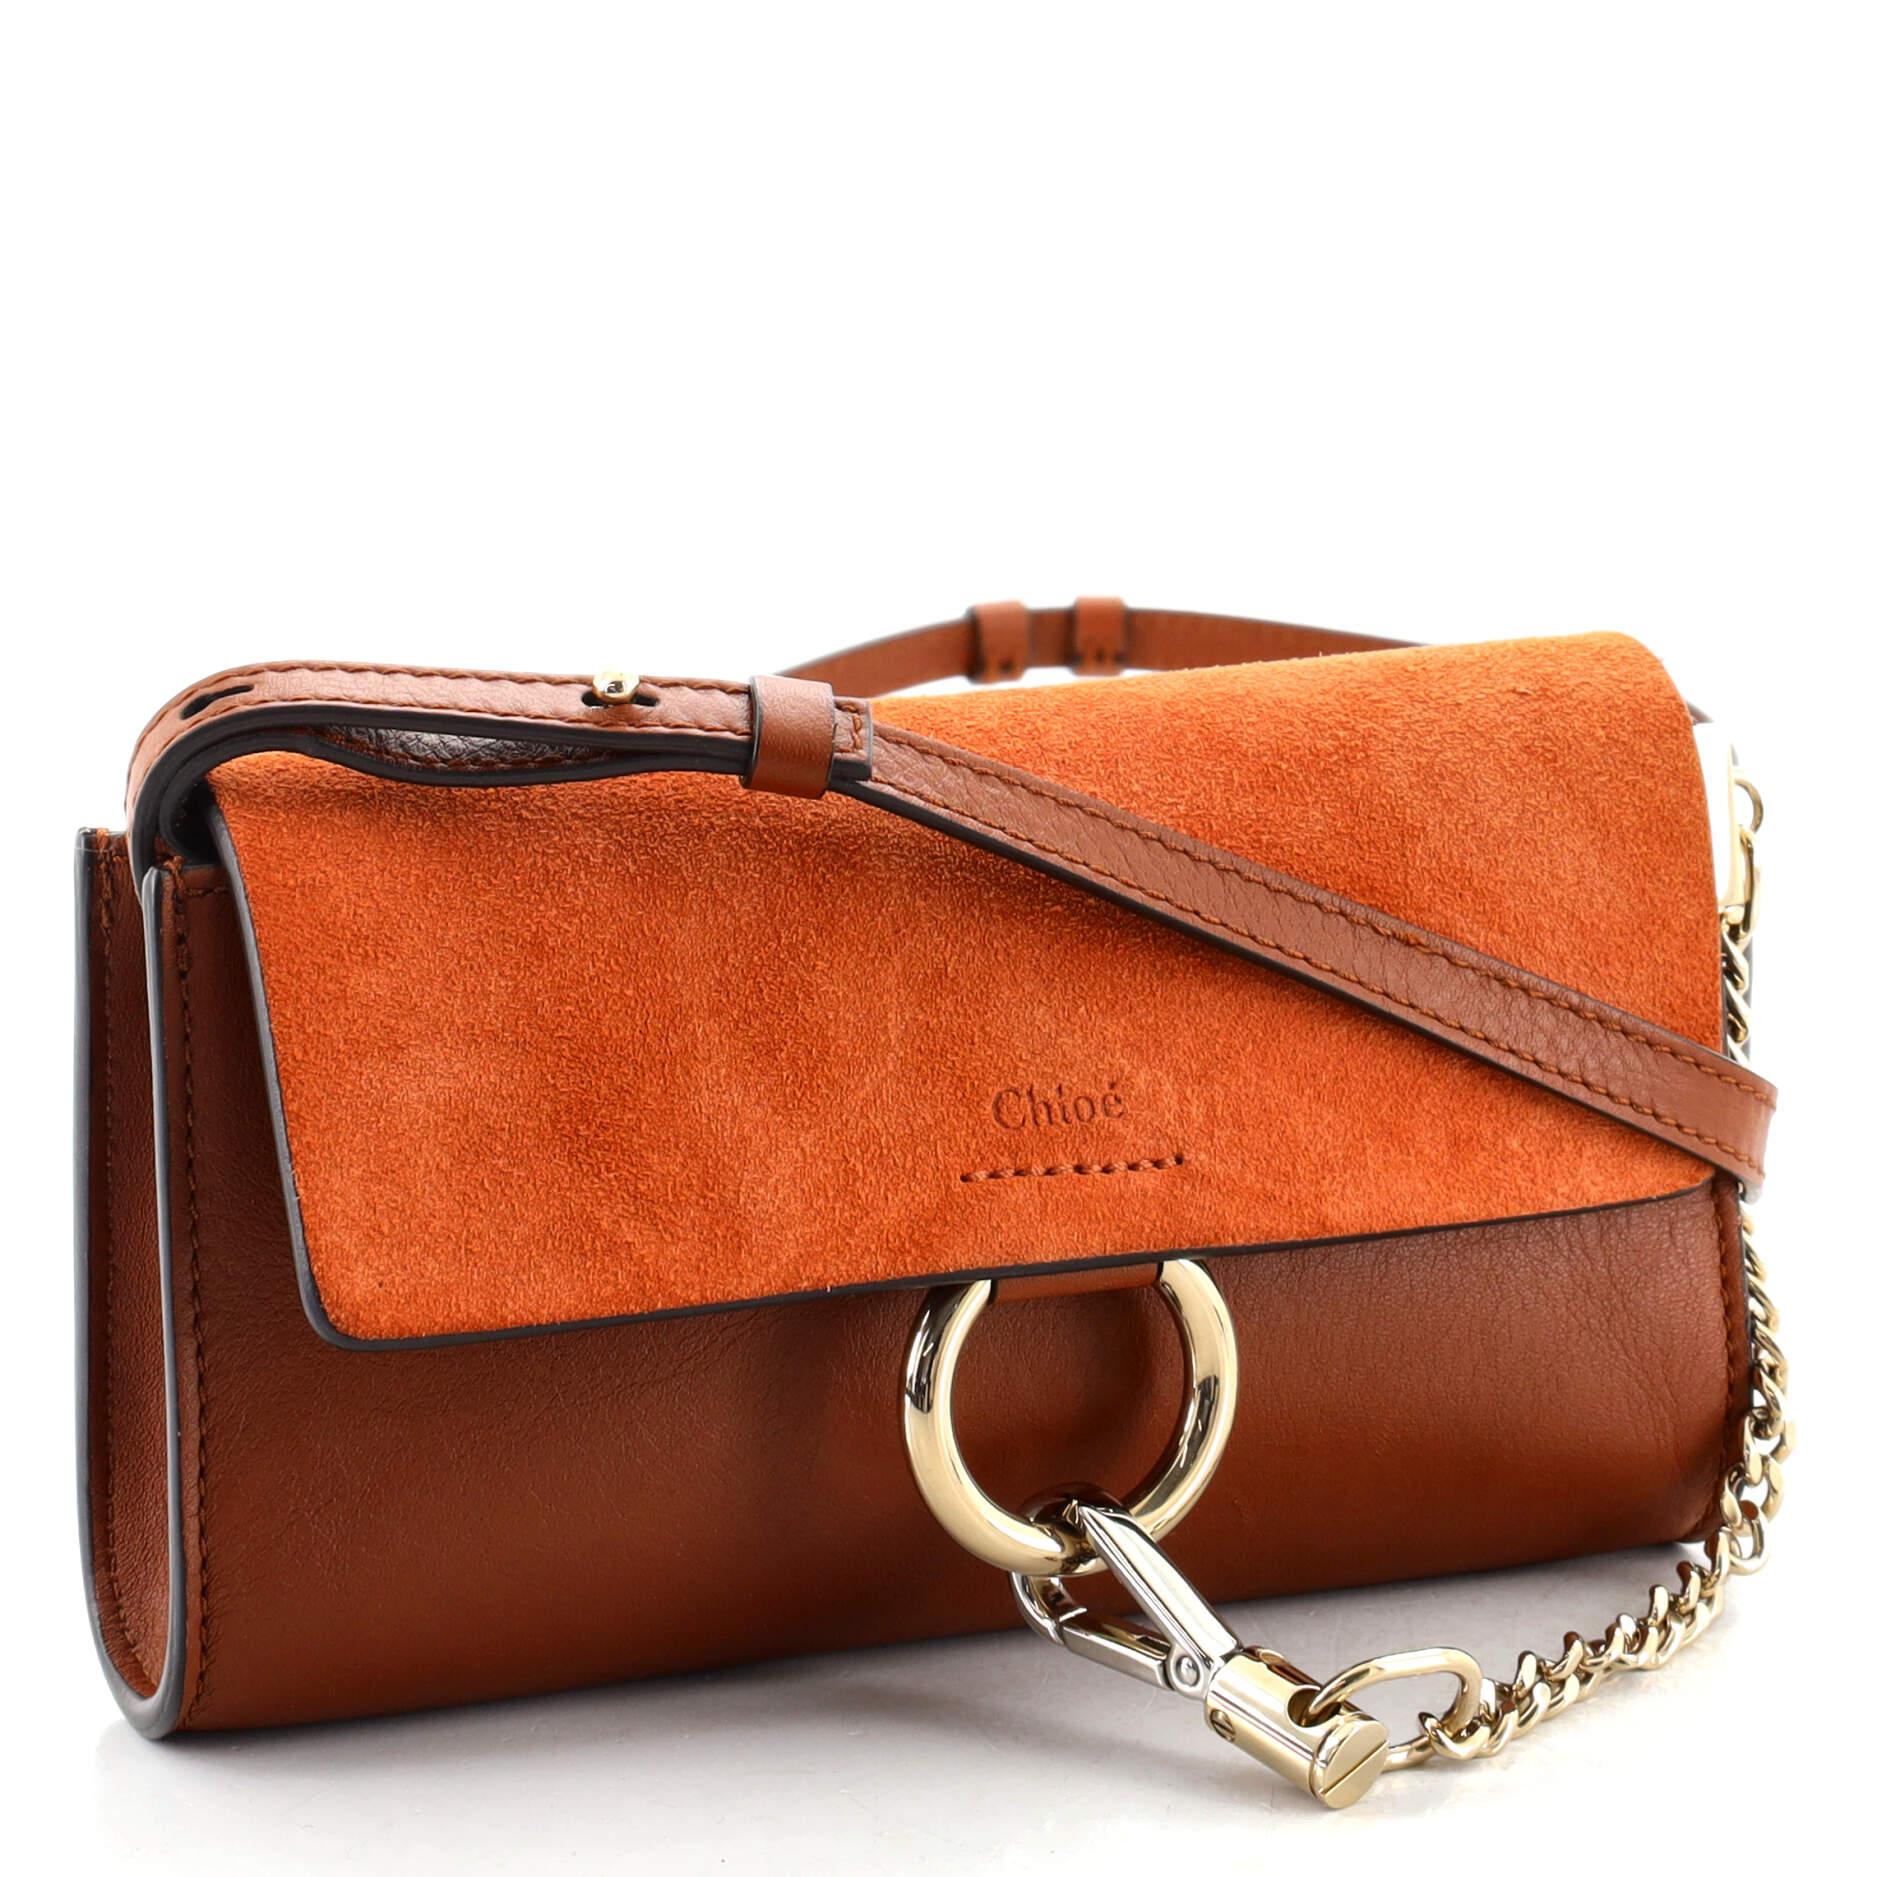 Brown Chloe Faye Shoulder Bag Leather and Suede Mini